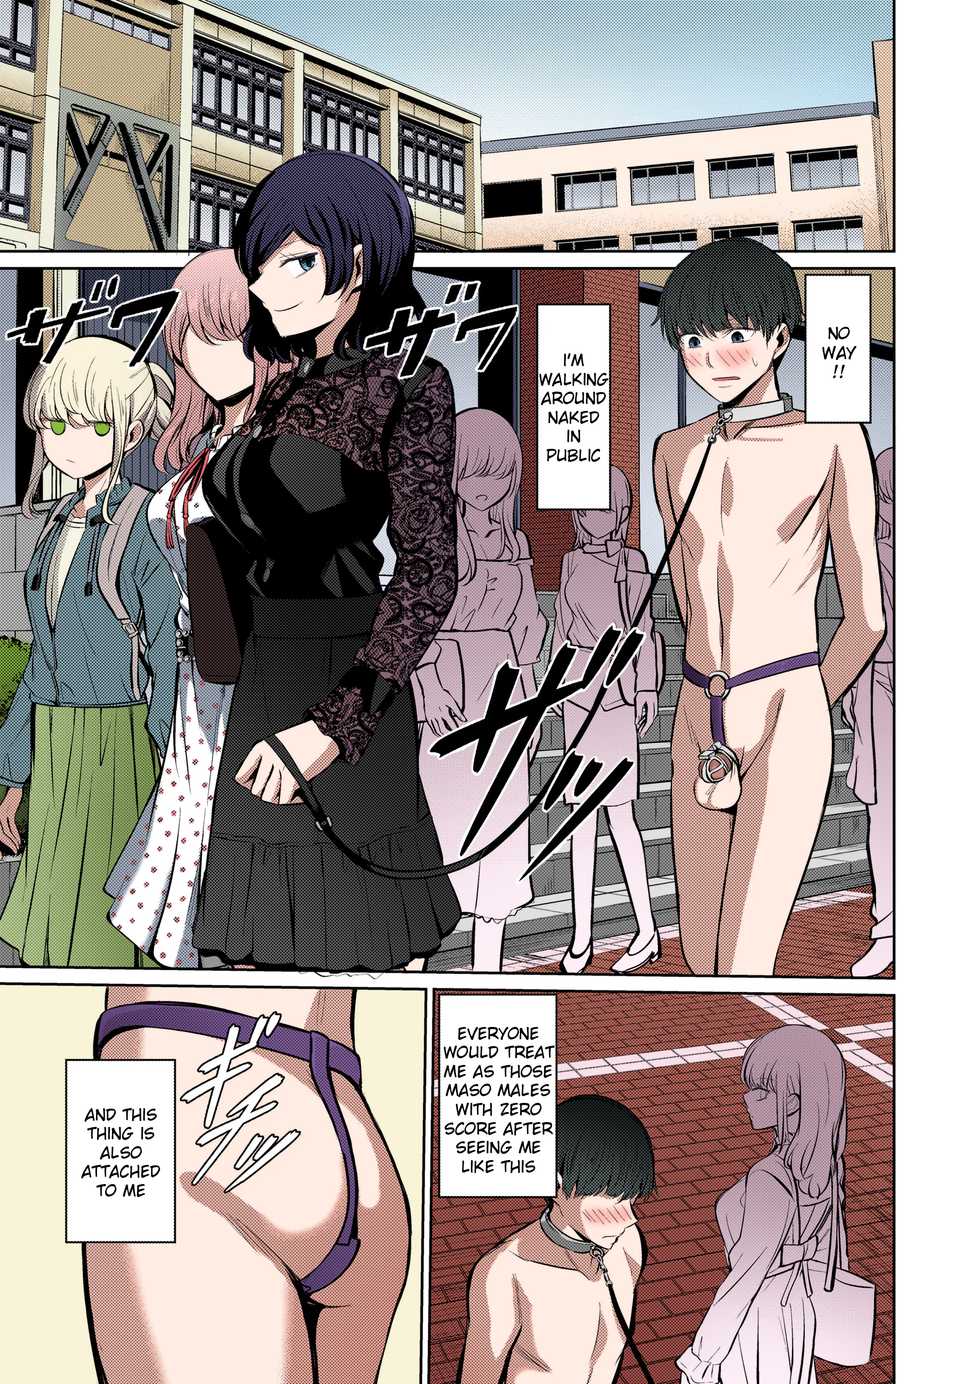 [Yamahata Rian] Tensuushugi no Kuni | A Country Based on Point System (Girls forM Vol. 20) [English] [SPDSD] [Colorized] [Digital] - Page 15